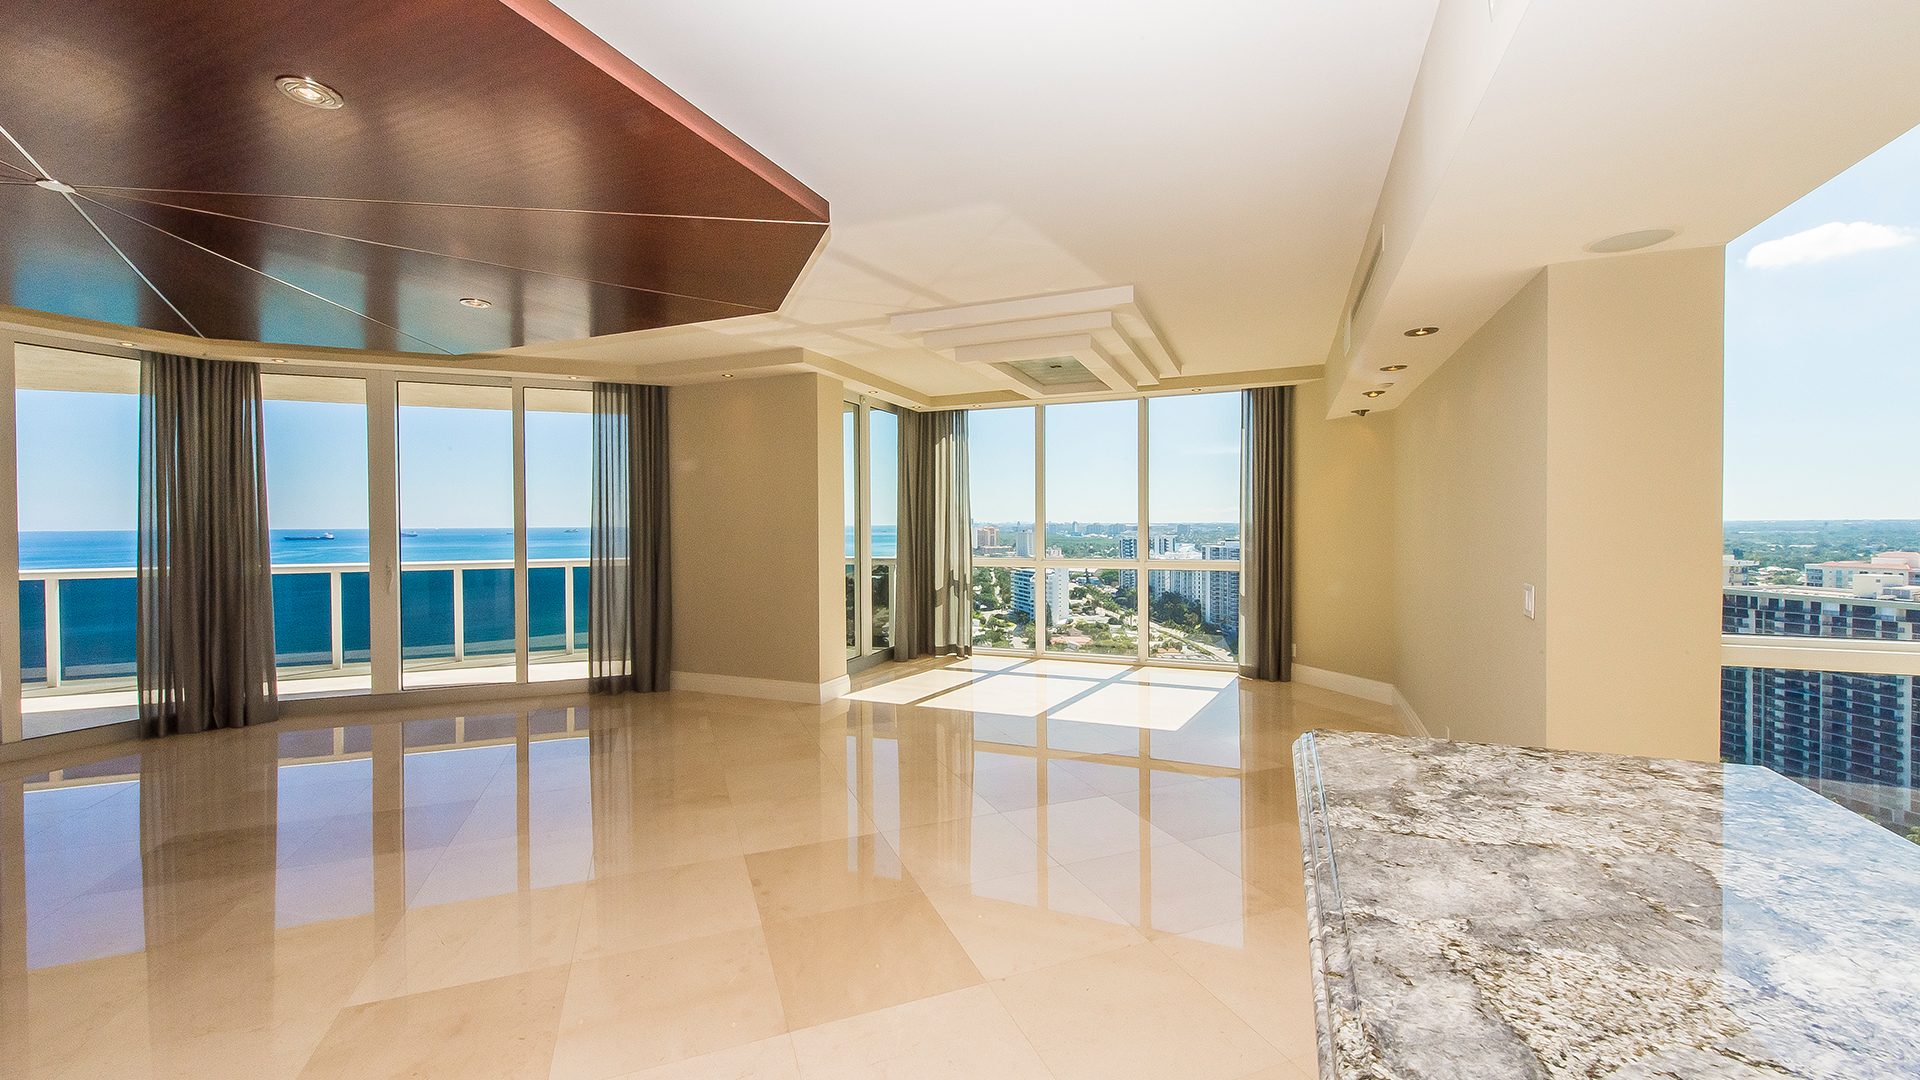 Residence 2310 For Sale at L'Hermitage, Fort Lauderdale Florida 33308